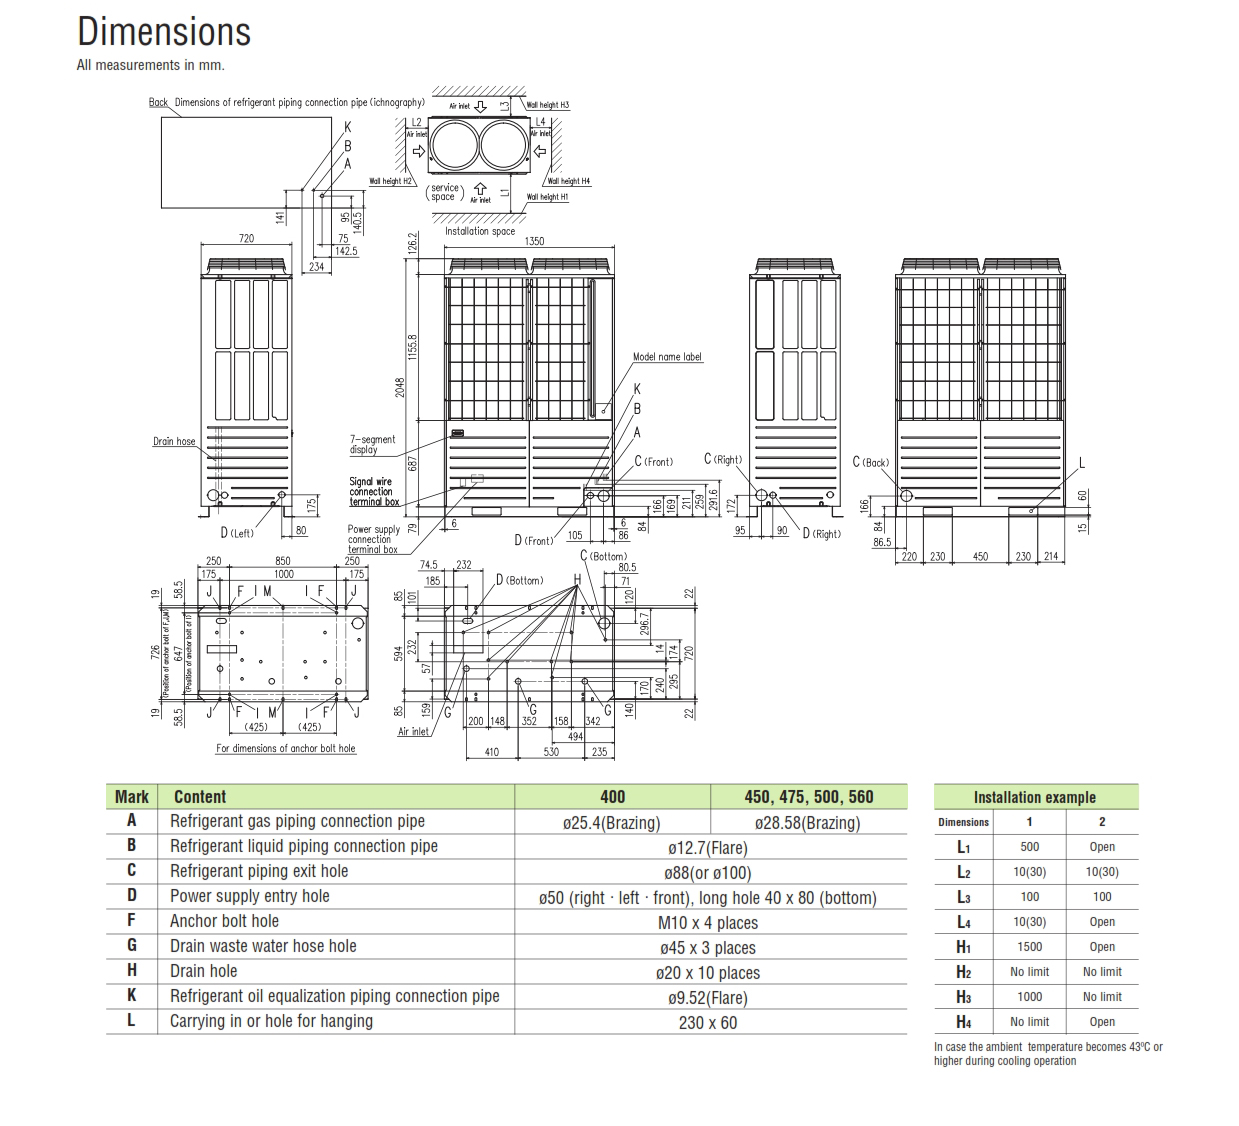 Heat pump combination systems 26, 28, 30, 32, 34, 36, 38, 40HP (73.5kW~112.0kW)